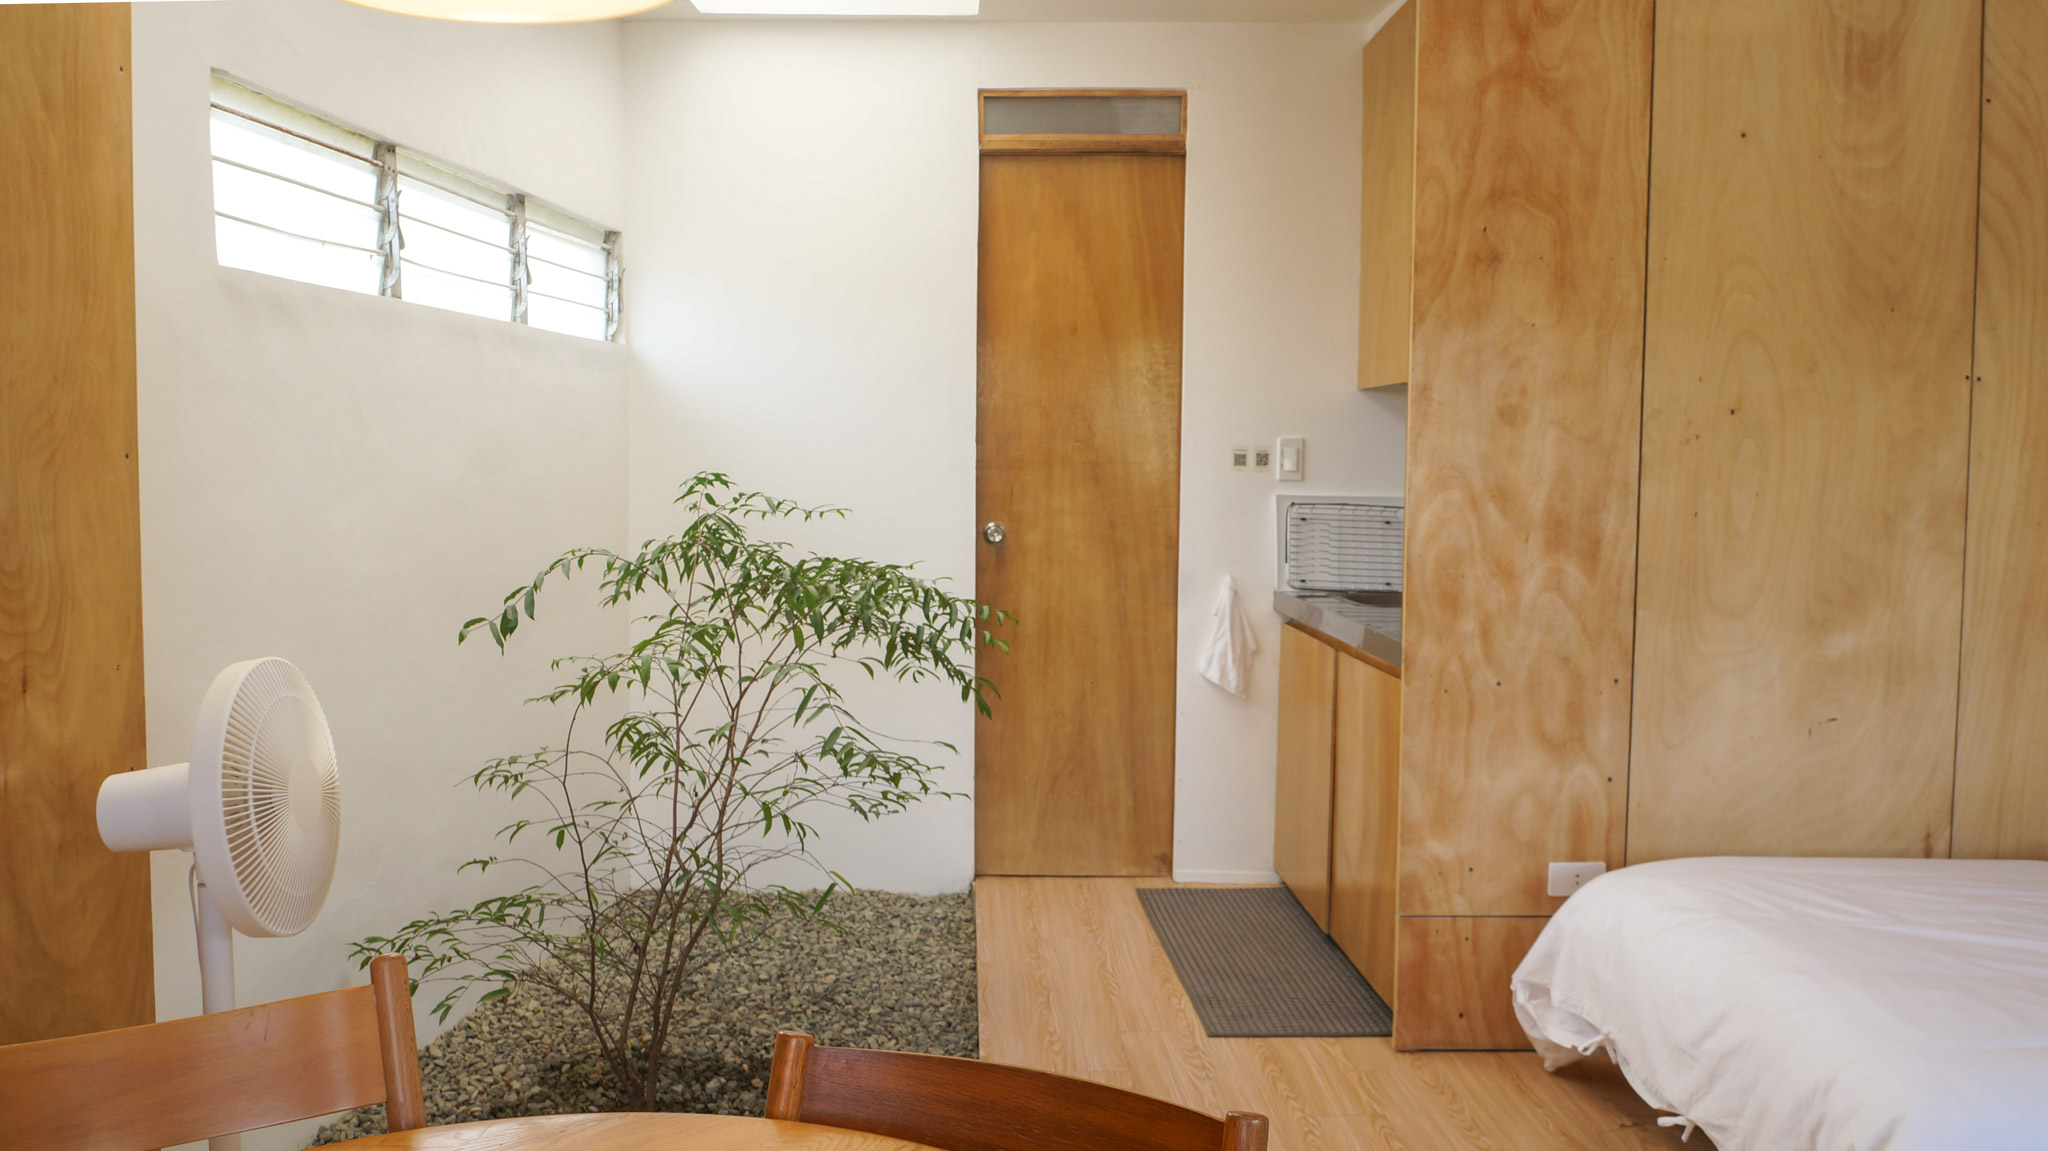 A small indoor garden with a solitary tree and gravel next to a small kitchenette.